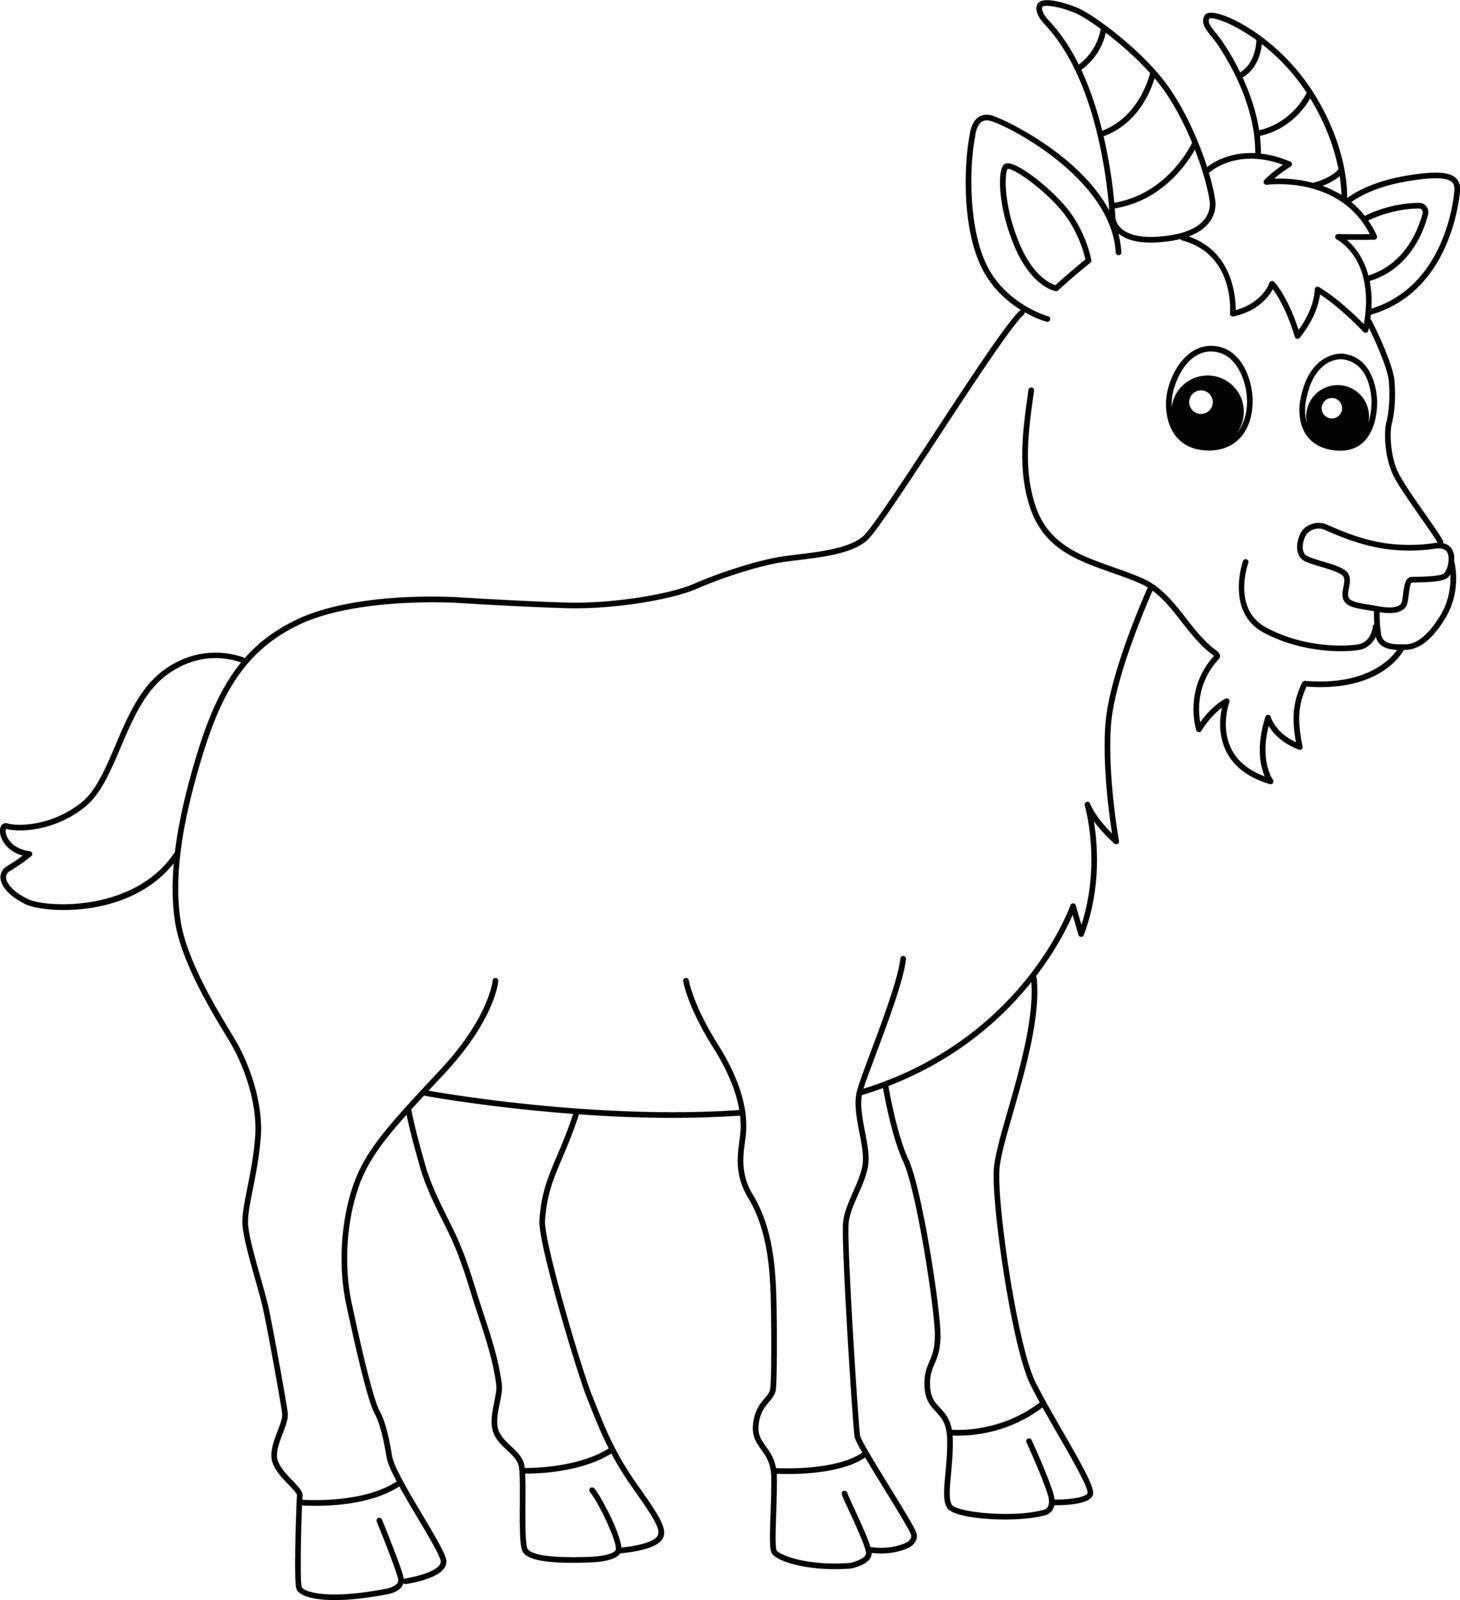 Goat Coloring Page Isolated for Kids by abbydesign